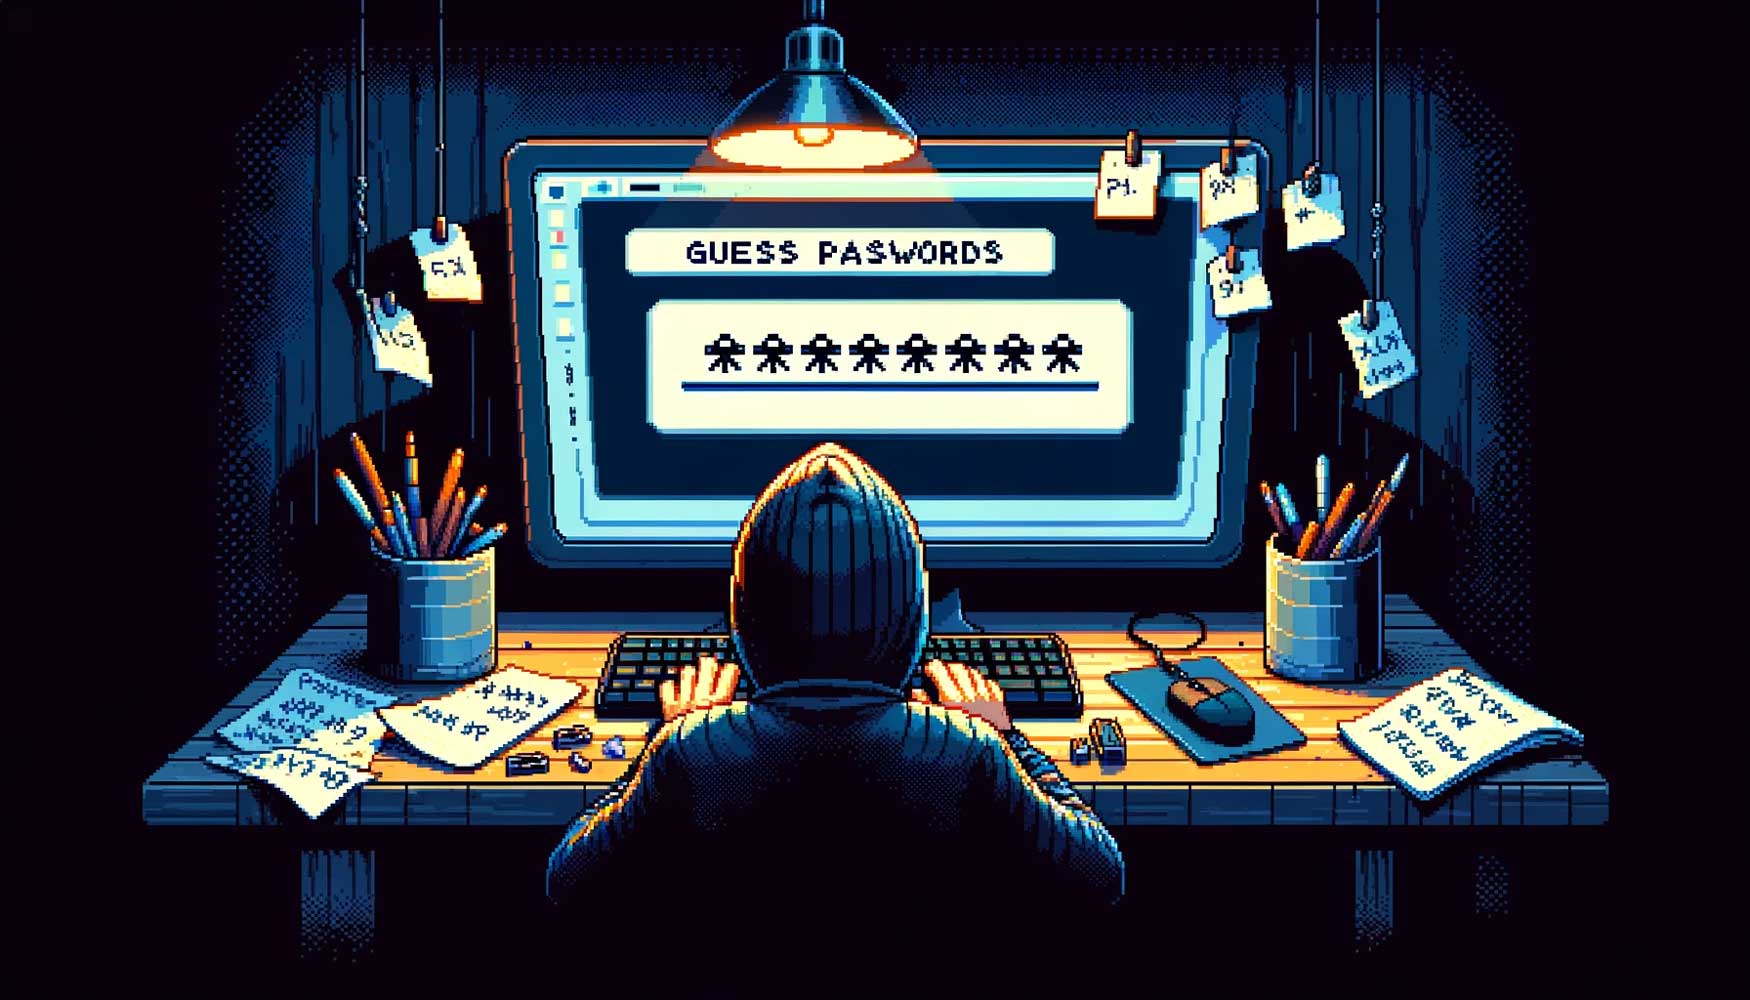 A pixel art scene depicting a thief trying to guess passwords. The setting is a dark room lit only by the glow of a computer screen. The thief is hunched over a keyboard, visibly concentrating on the screen which displays a password input field. Around the thief, there are scattered notes with written guesses and crossed-out passwords. The art style should be detailed and colorful, capturing the essence of pixel art with a focus on conveying the secretive and intense atmosphere of the scene.